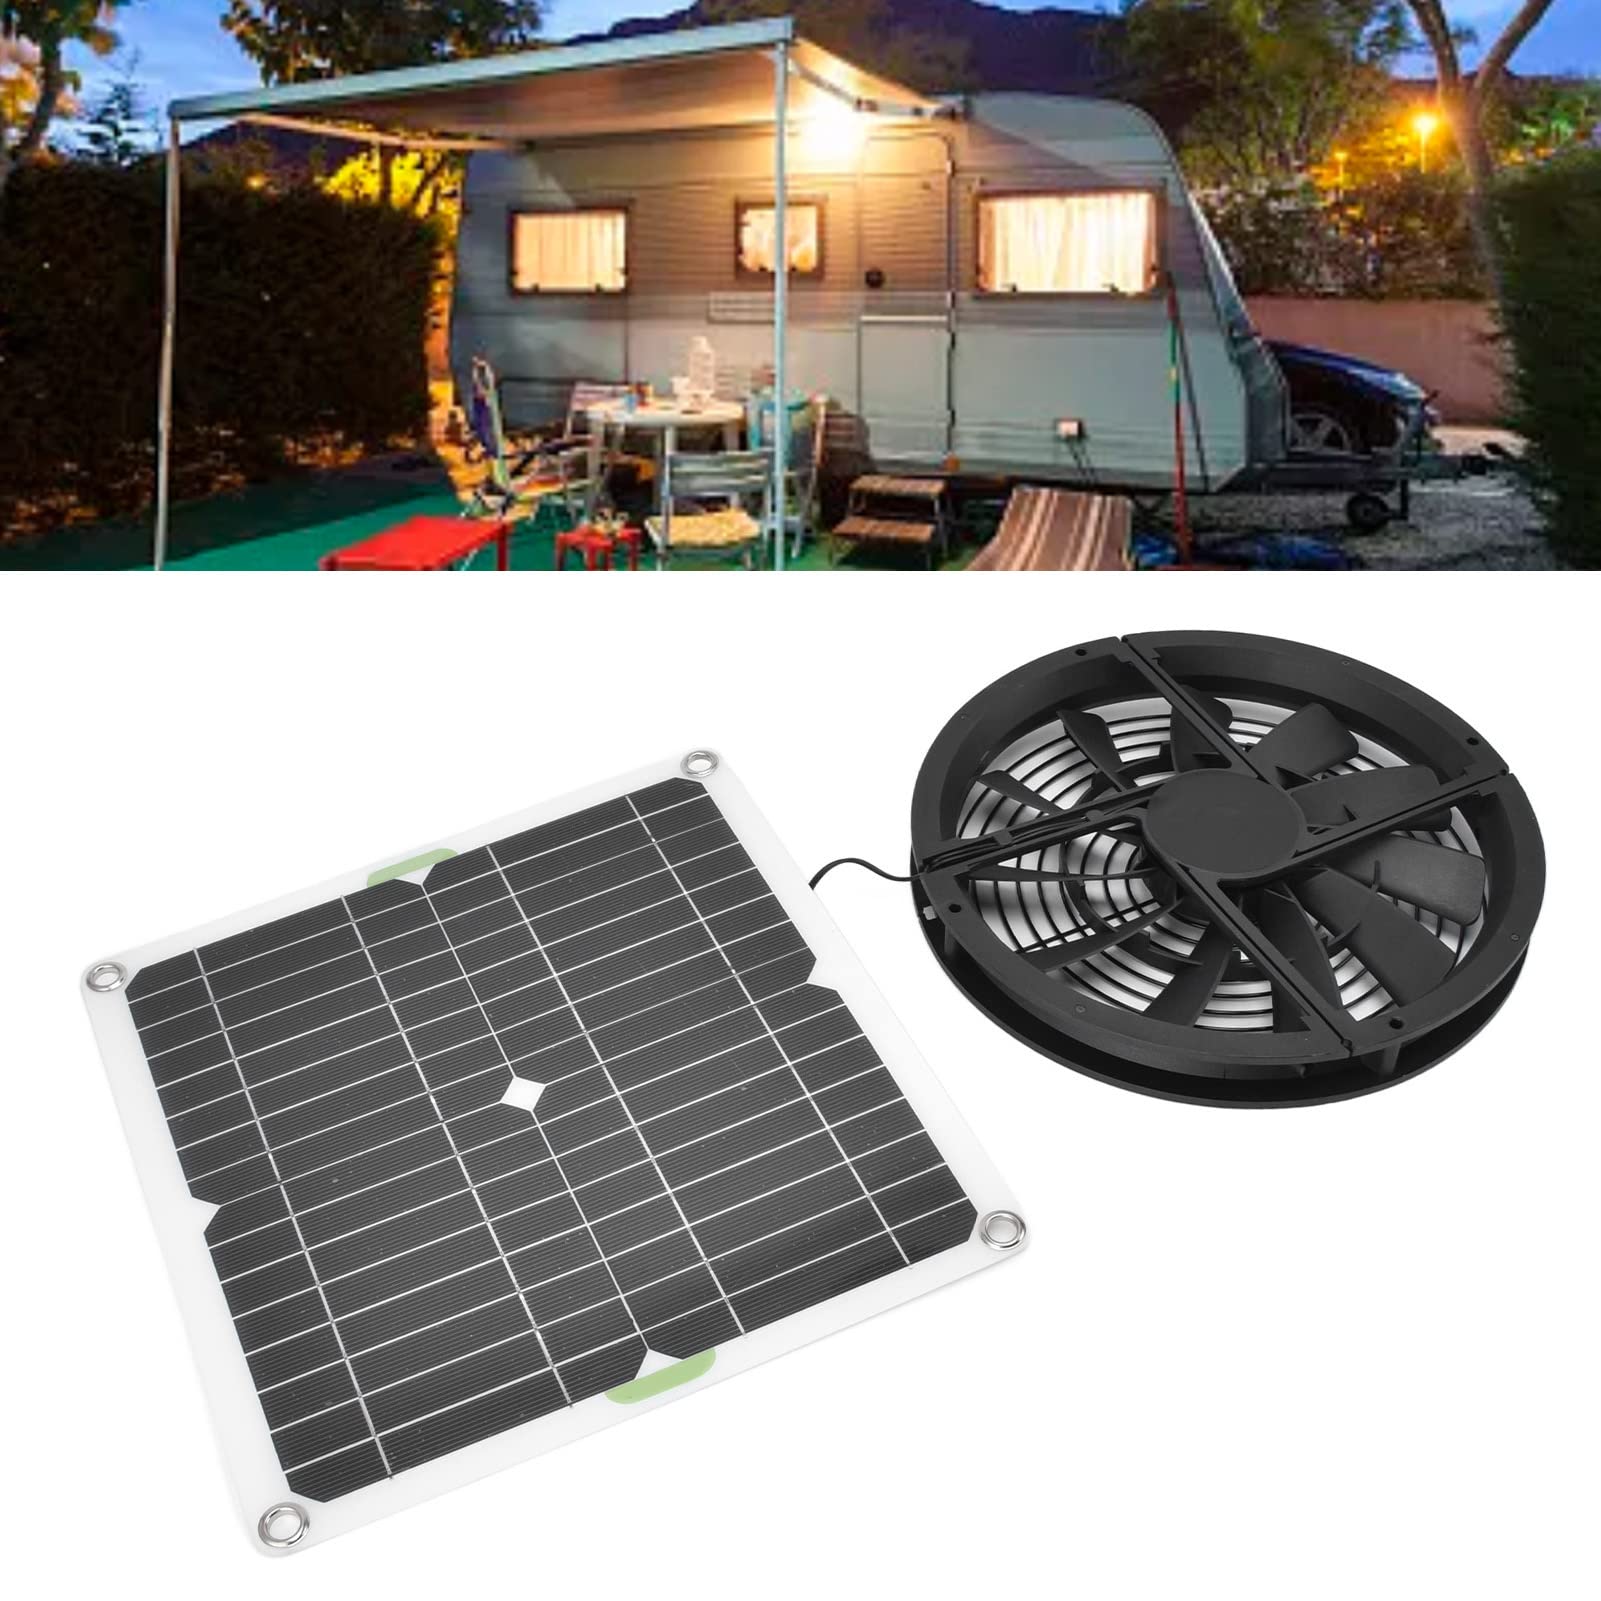 Solar Power Fan, Solar Fan For Greenhouse With 100w Waterproof Solar Panel and 9.8 Inch High Speed Greenhouse Fan, Wall Mount Solar Fan For Chicken Coop, Dog Houses, Greenhouses, Rv Roof